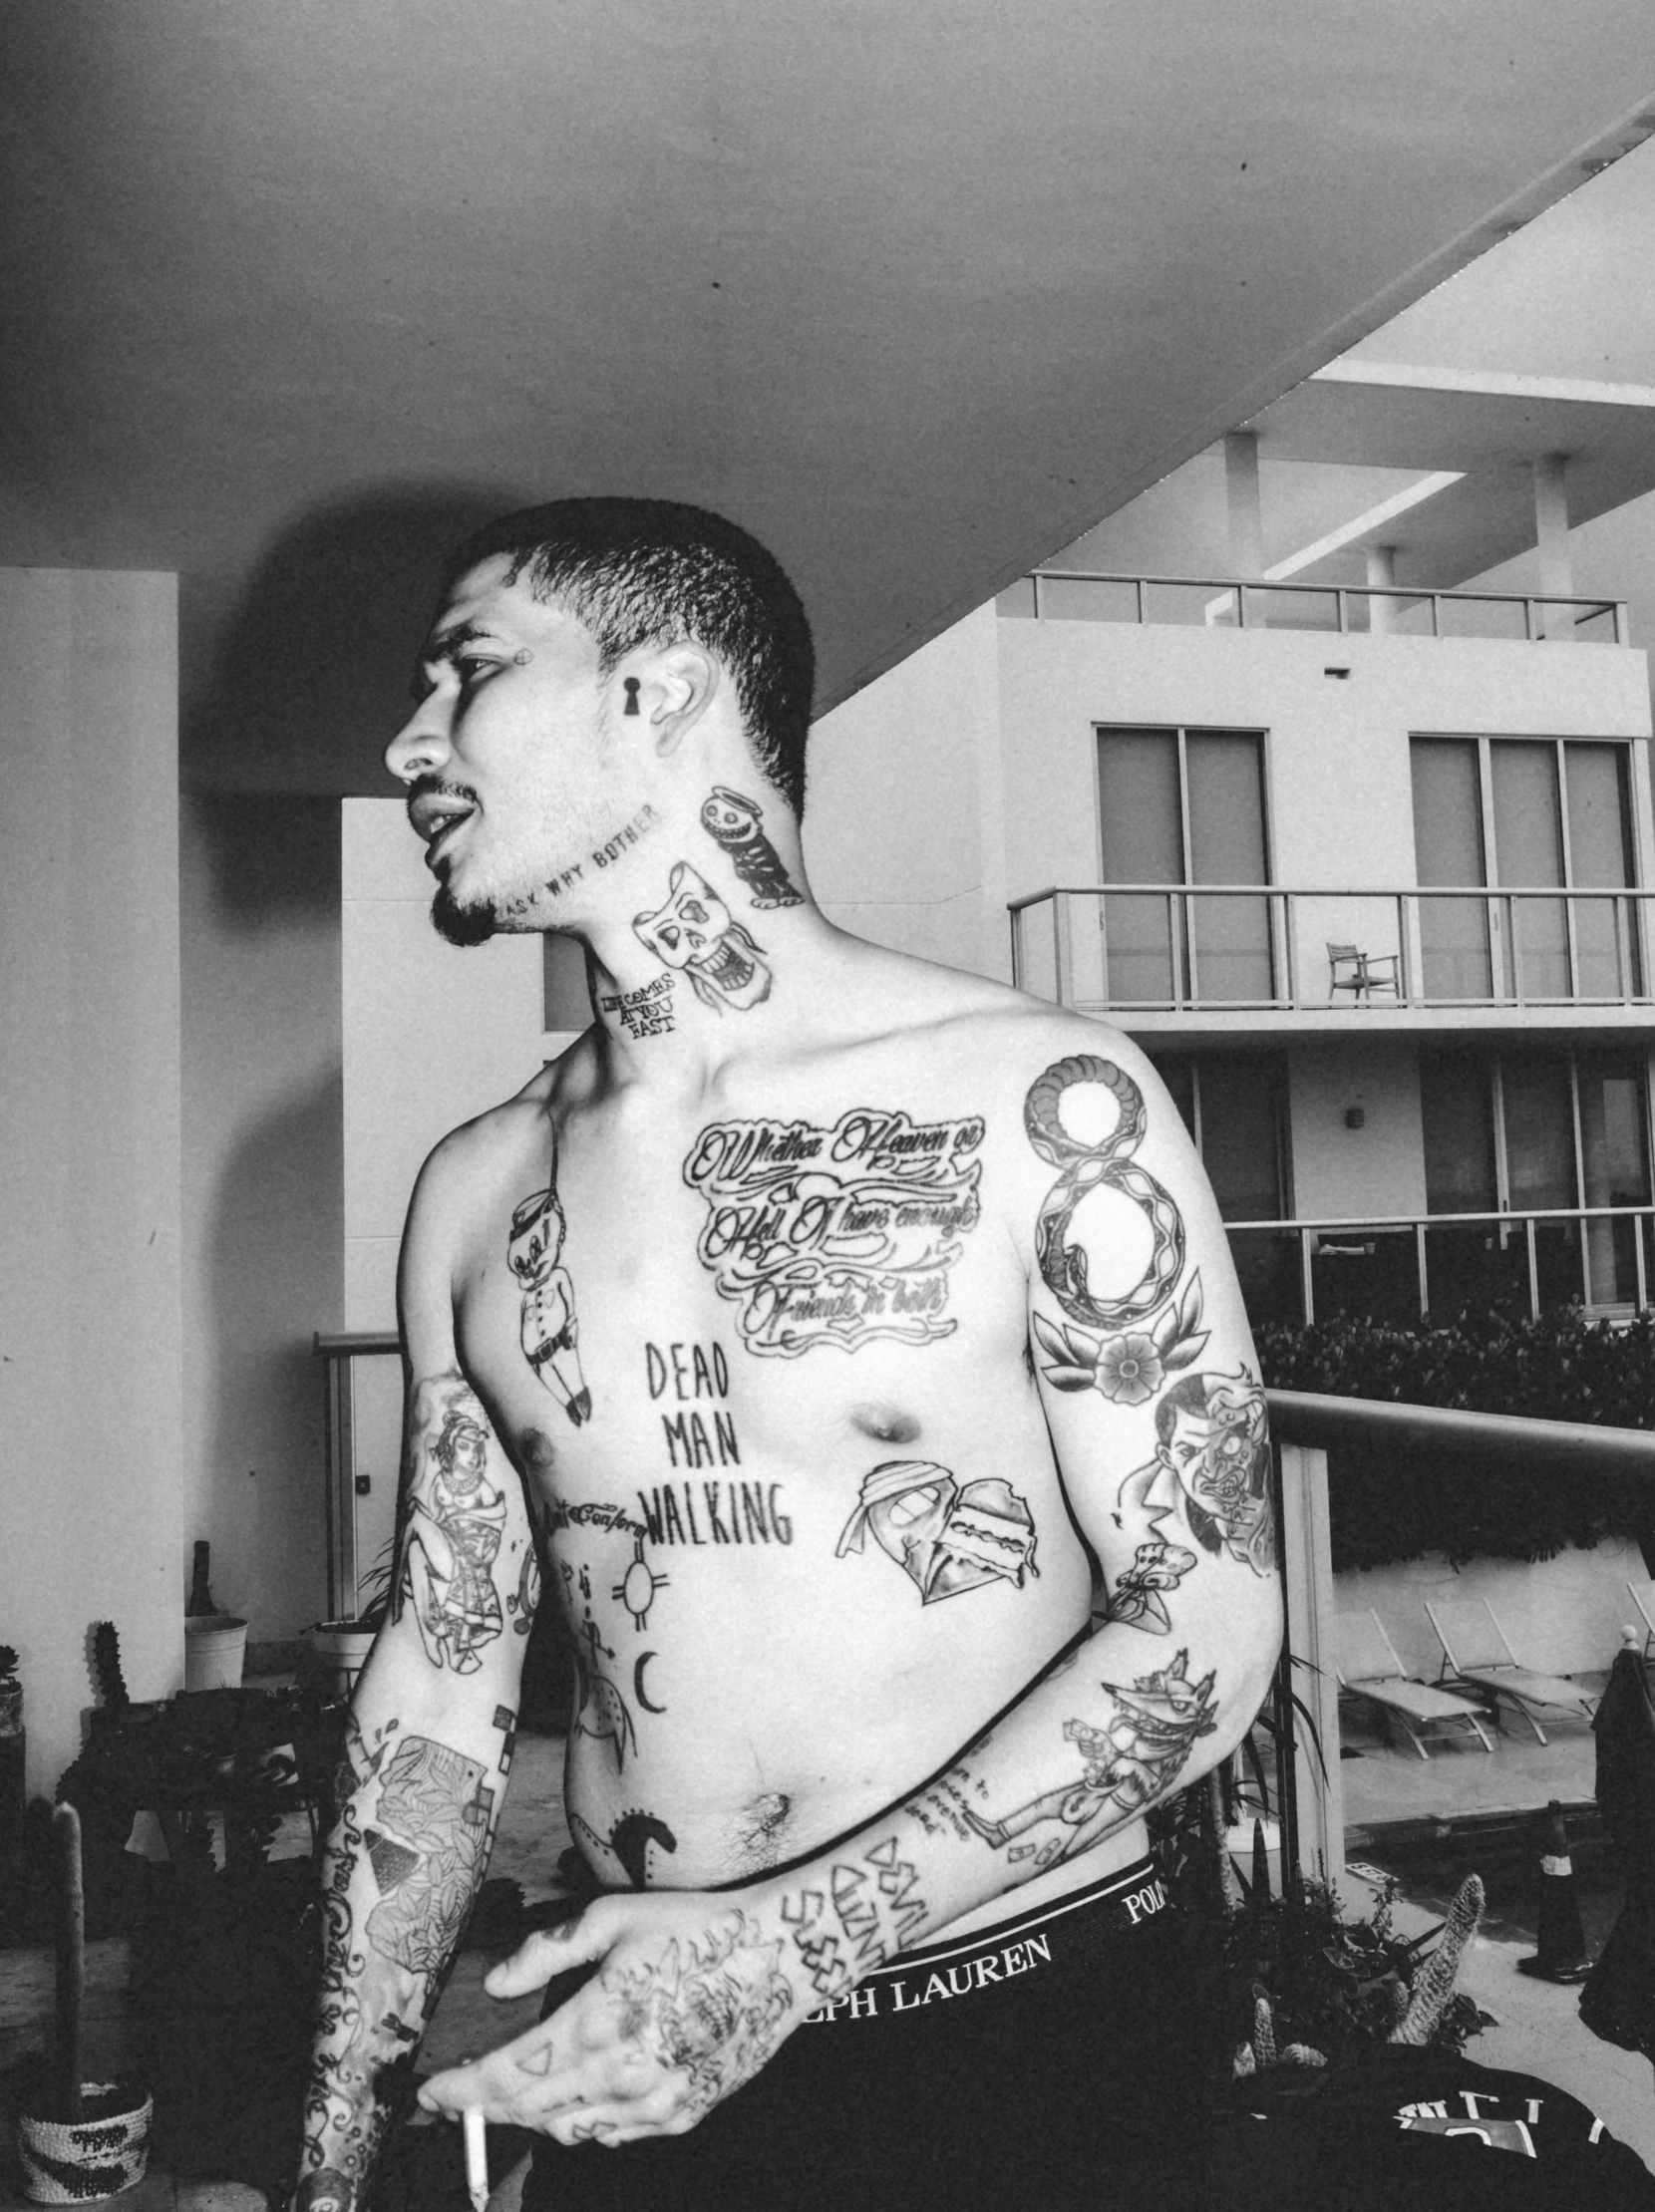 man with multiple tattoos standing inside a room